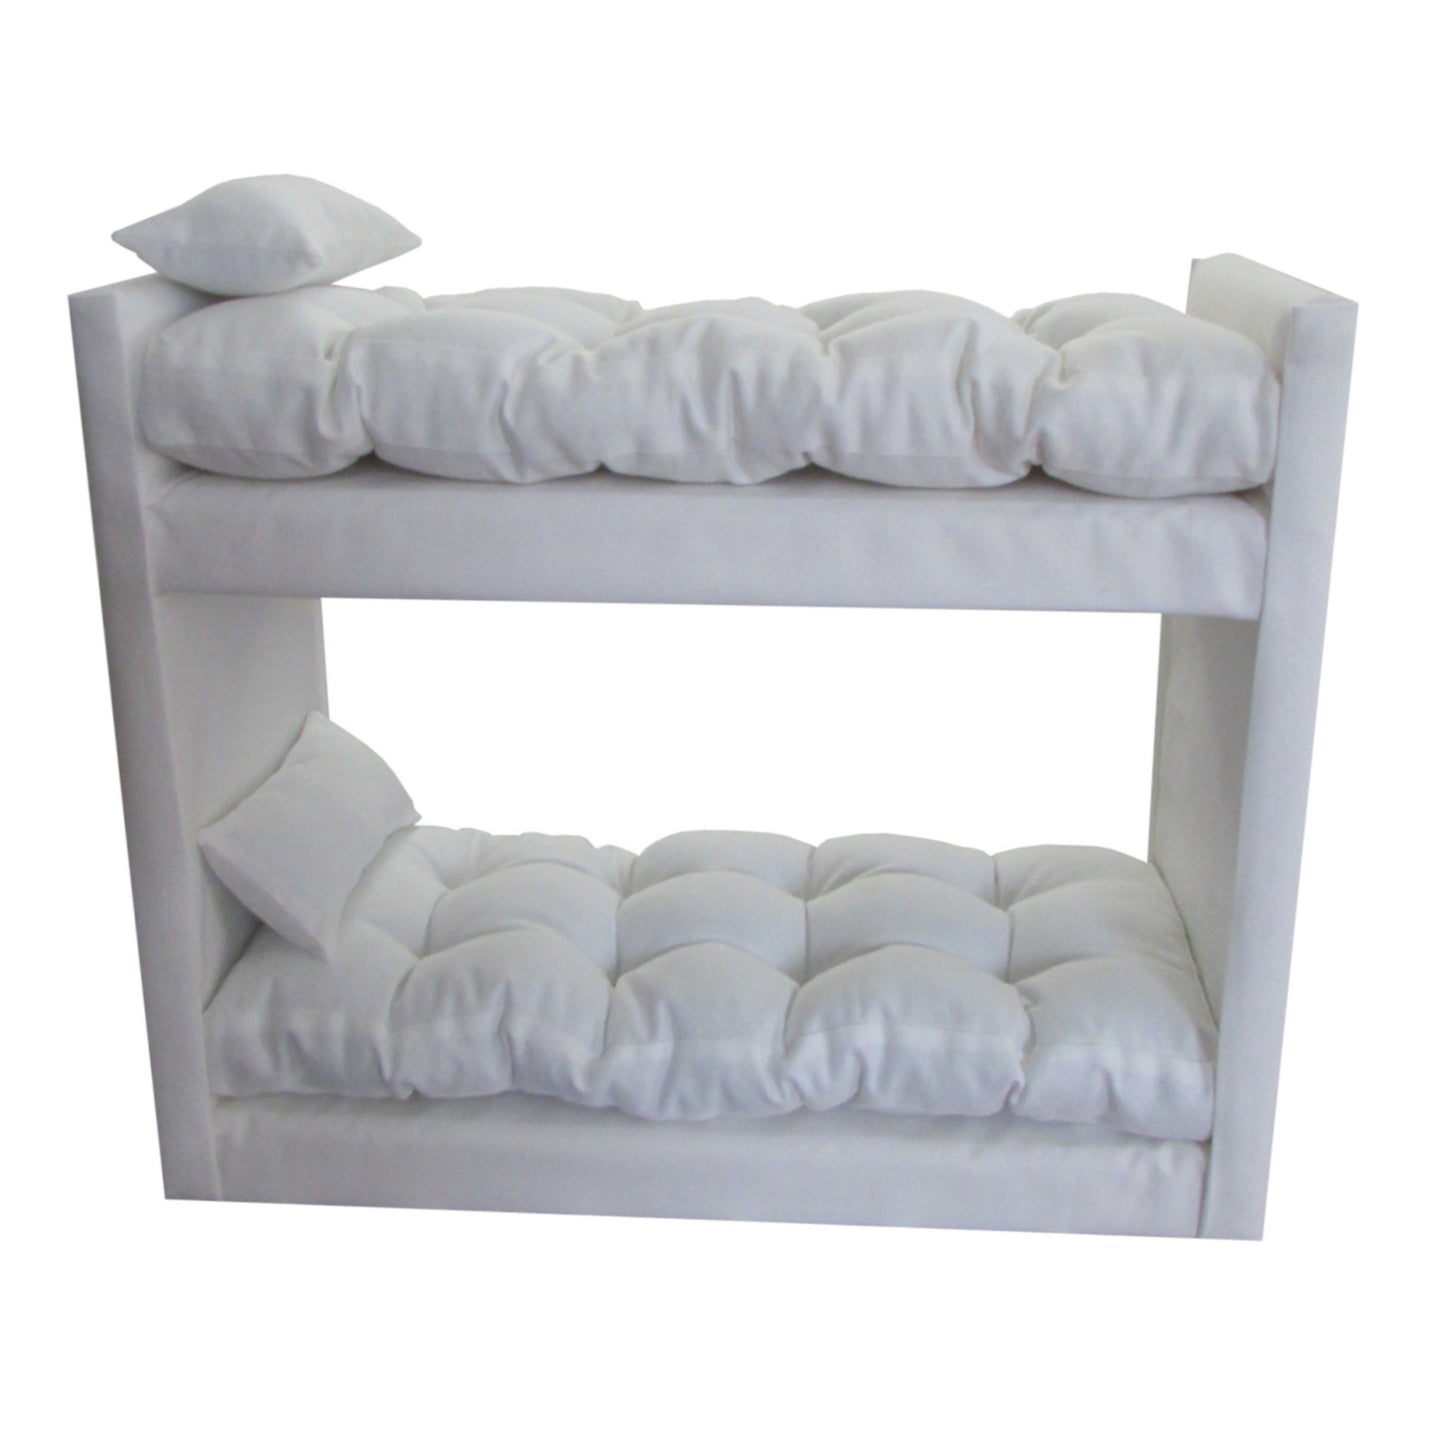 Upholstered Doll Bunk Bed for 11.5-inch and 12-inch dolls